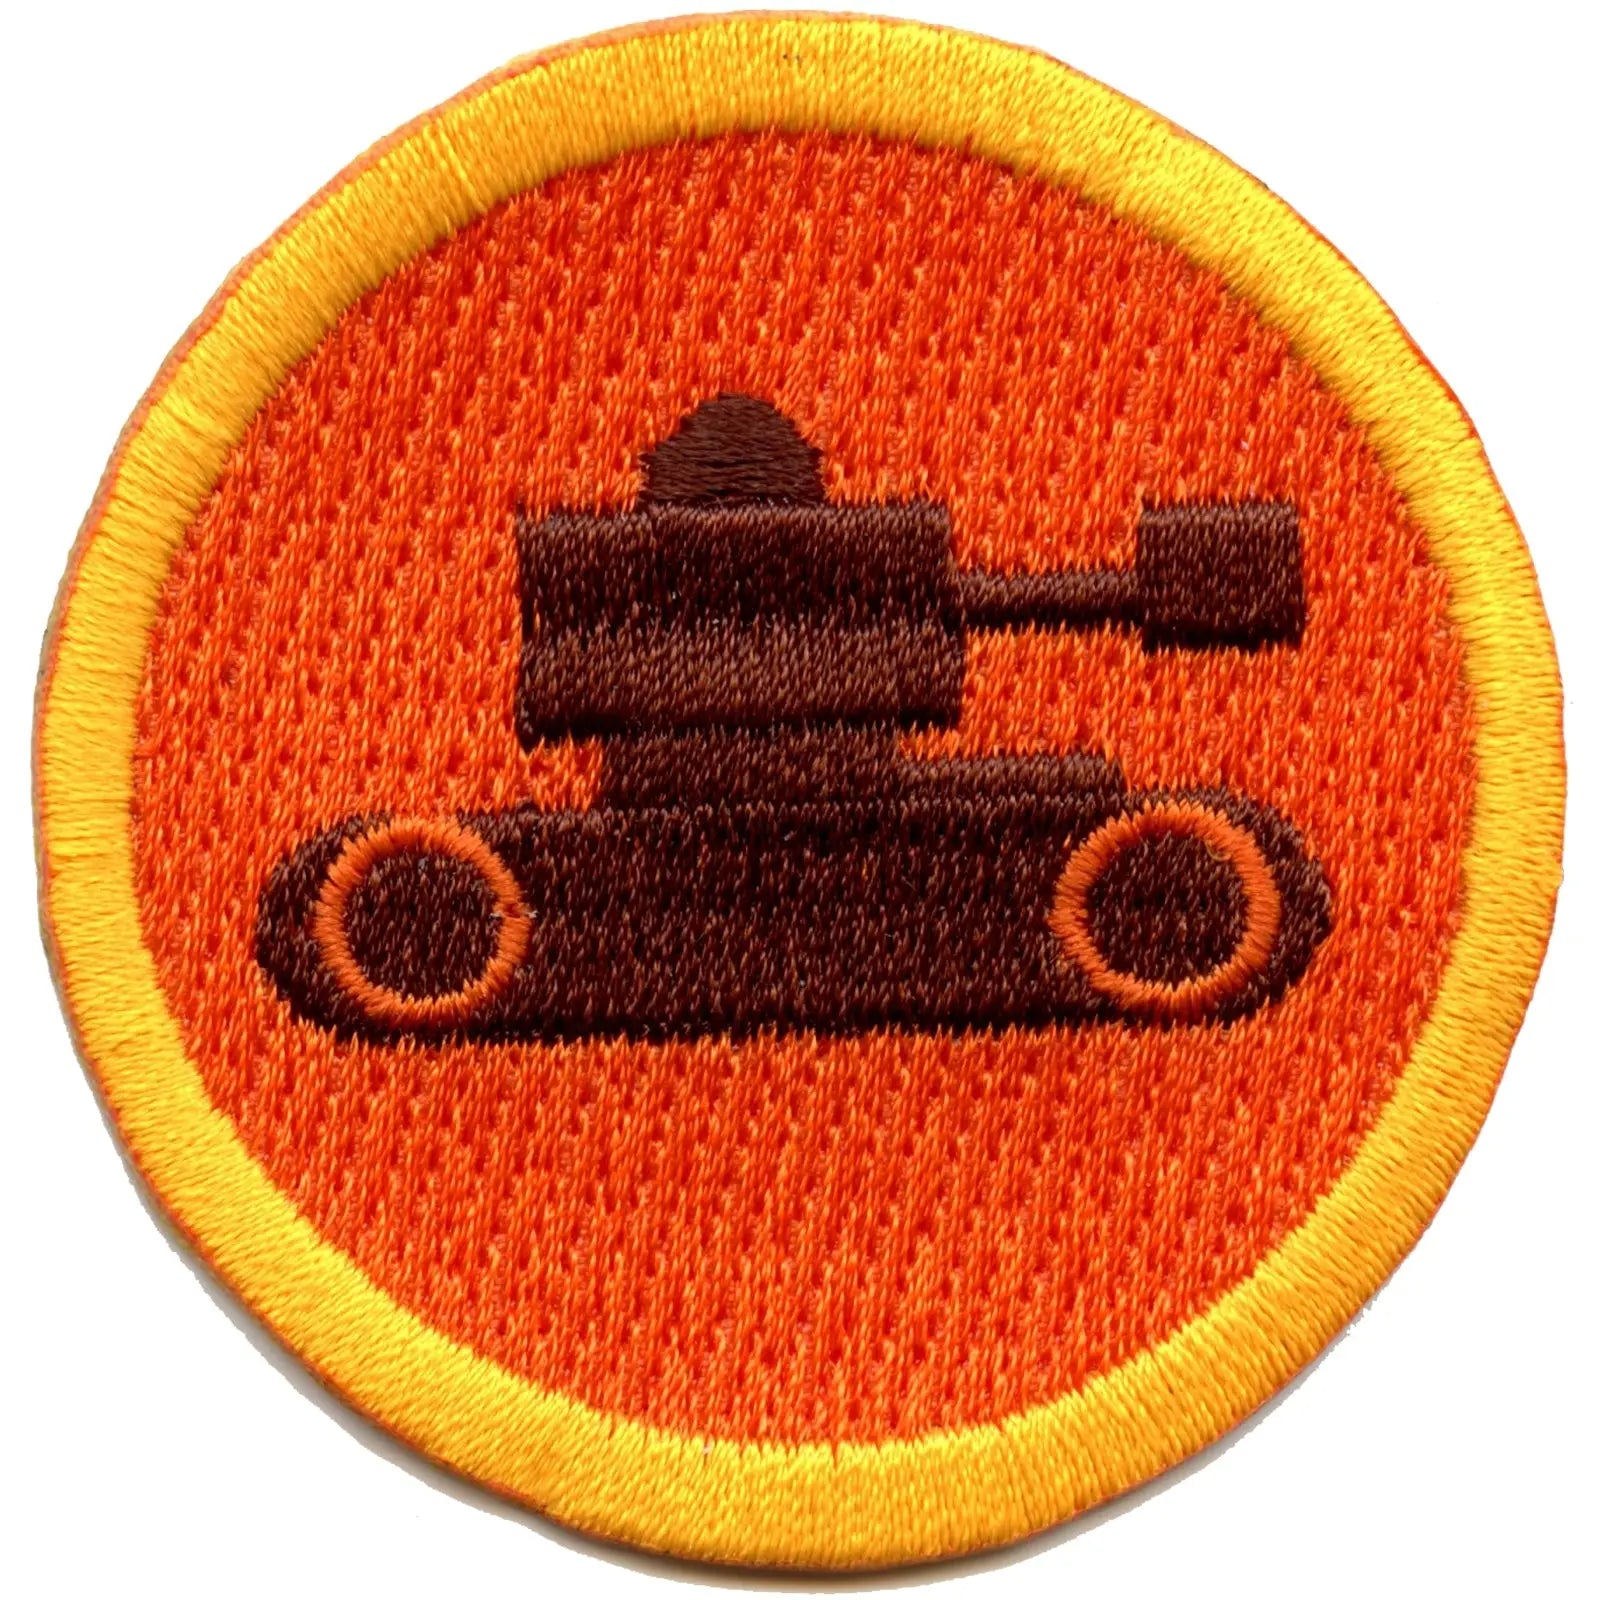 Military Tank Strategy Merit Badge Embroidered Iron-on Patch 